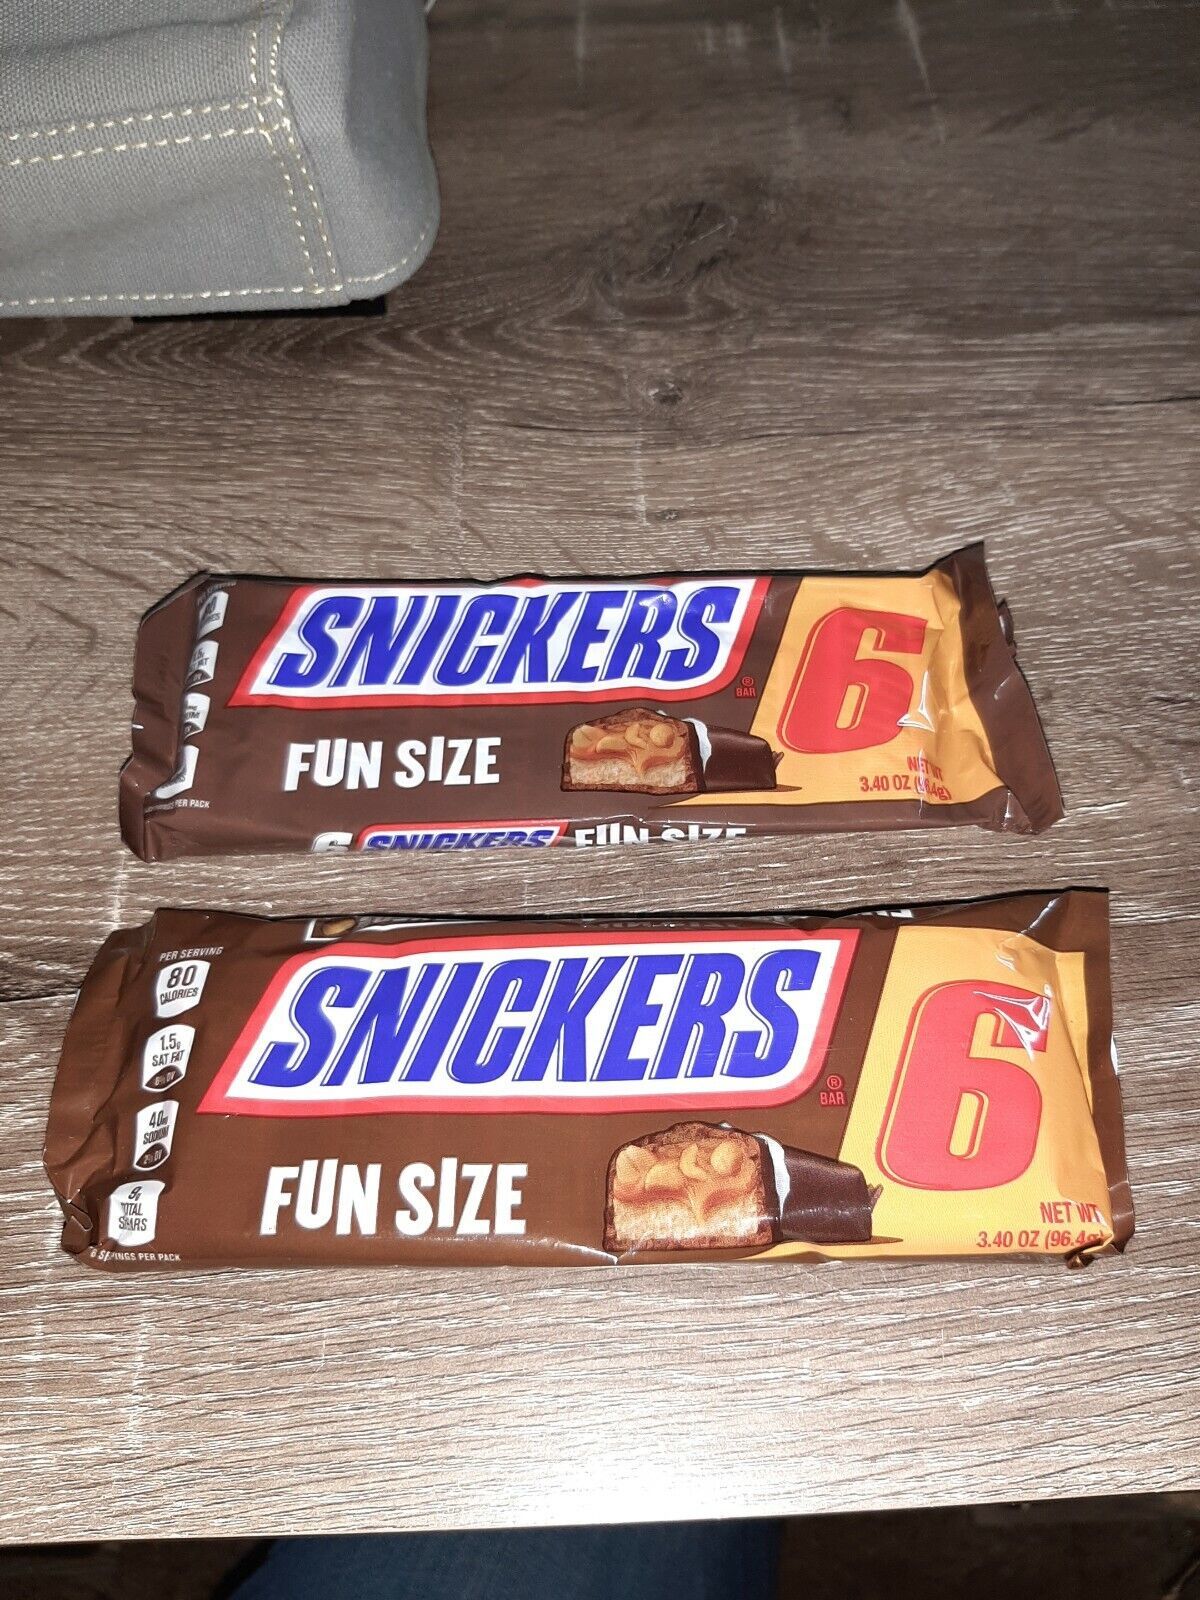 Primary image for 2 Packs of Snickers. 6 Fun Size Candy Bars. 3.40oz packs.